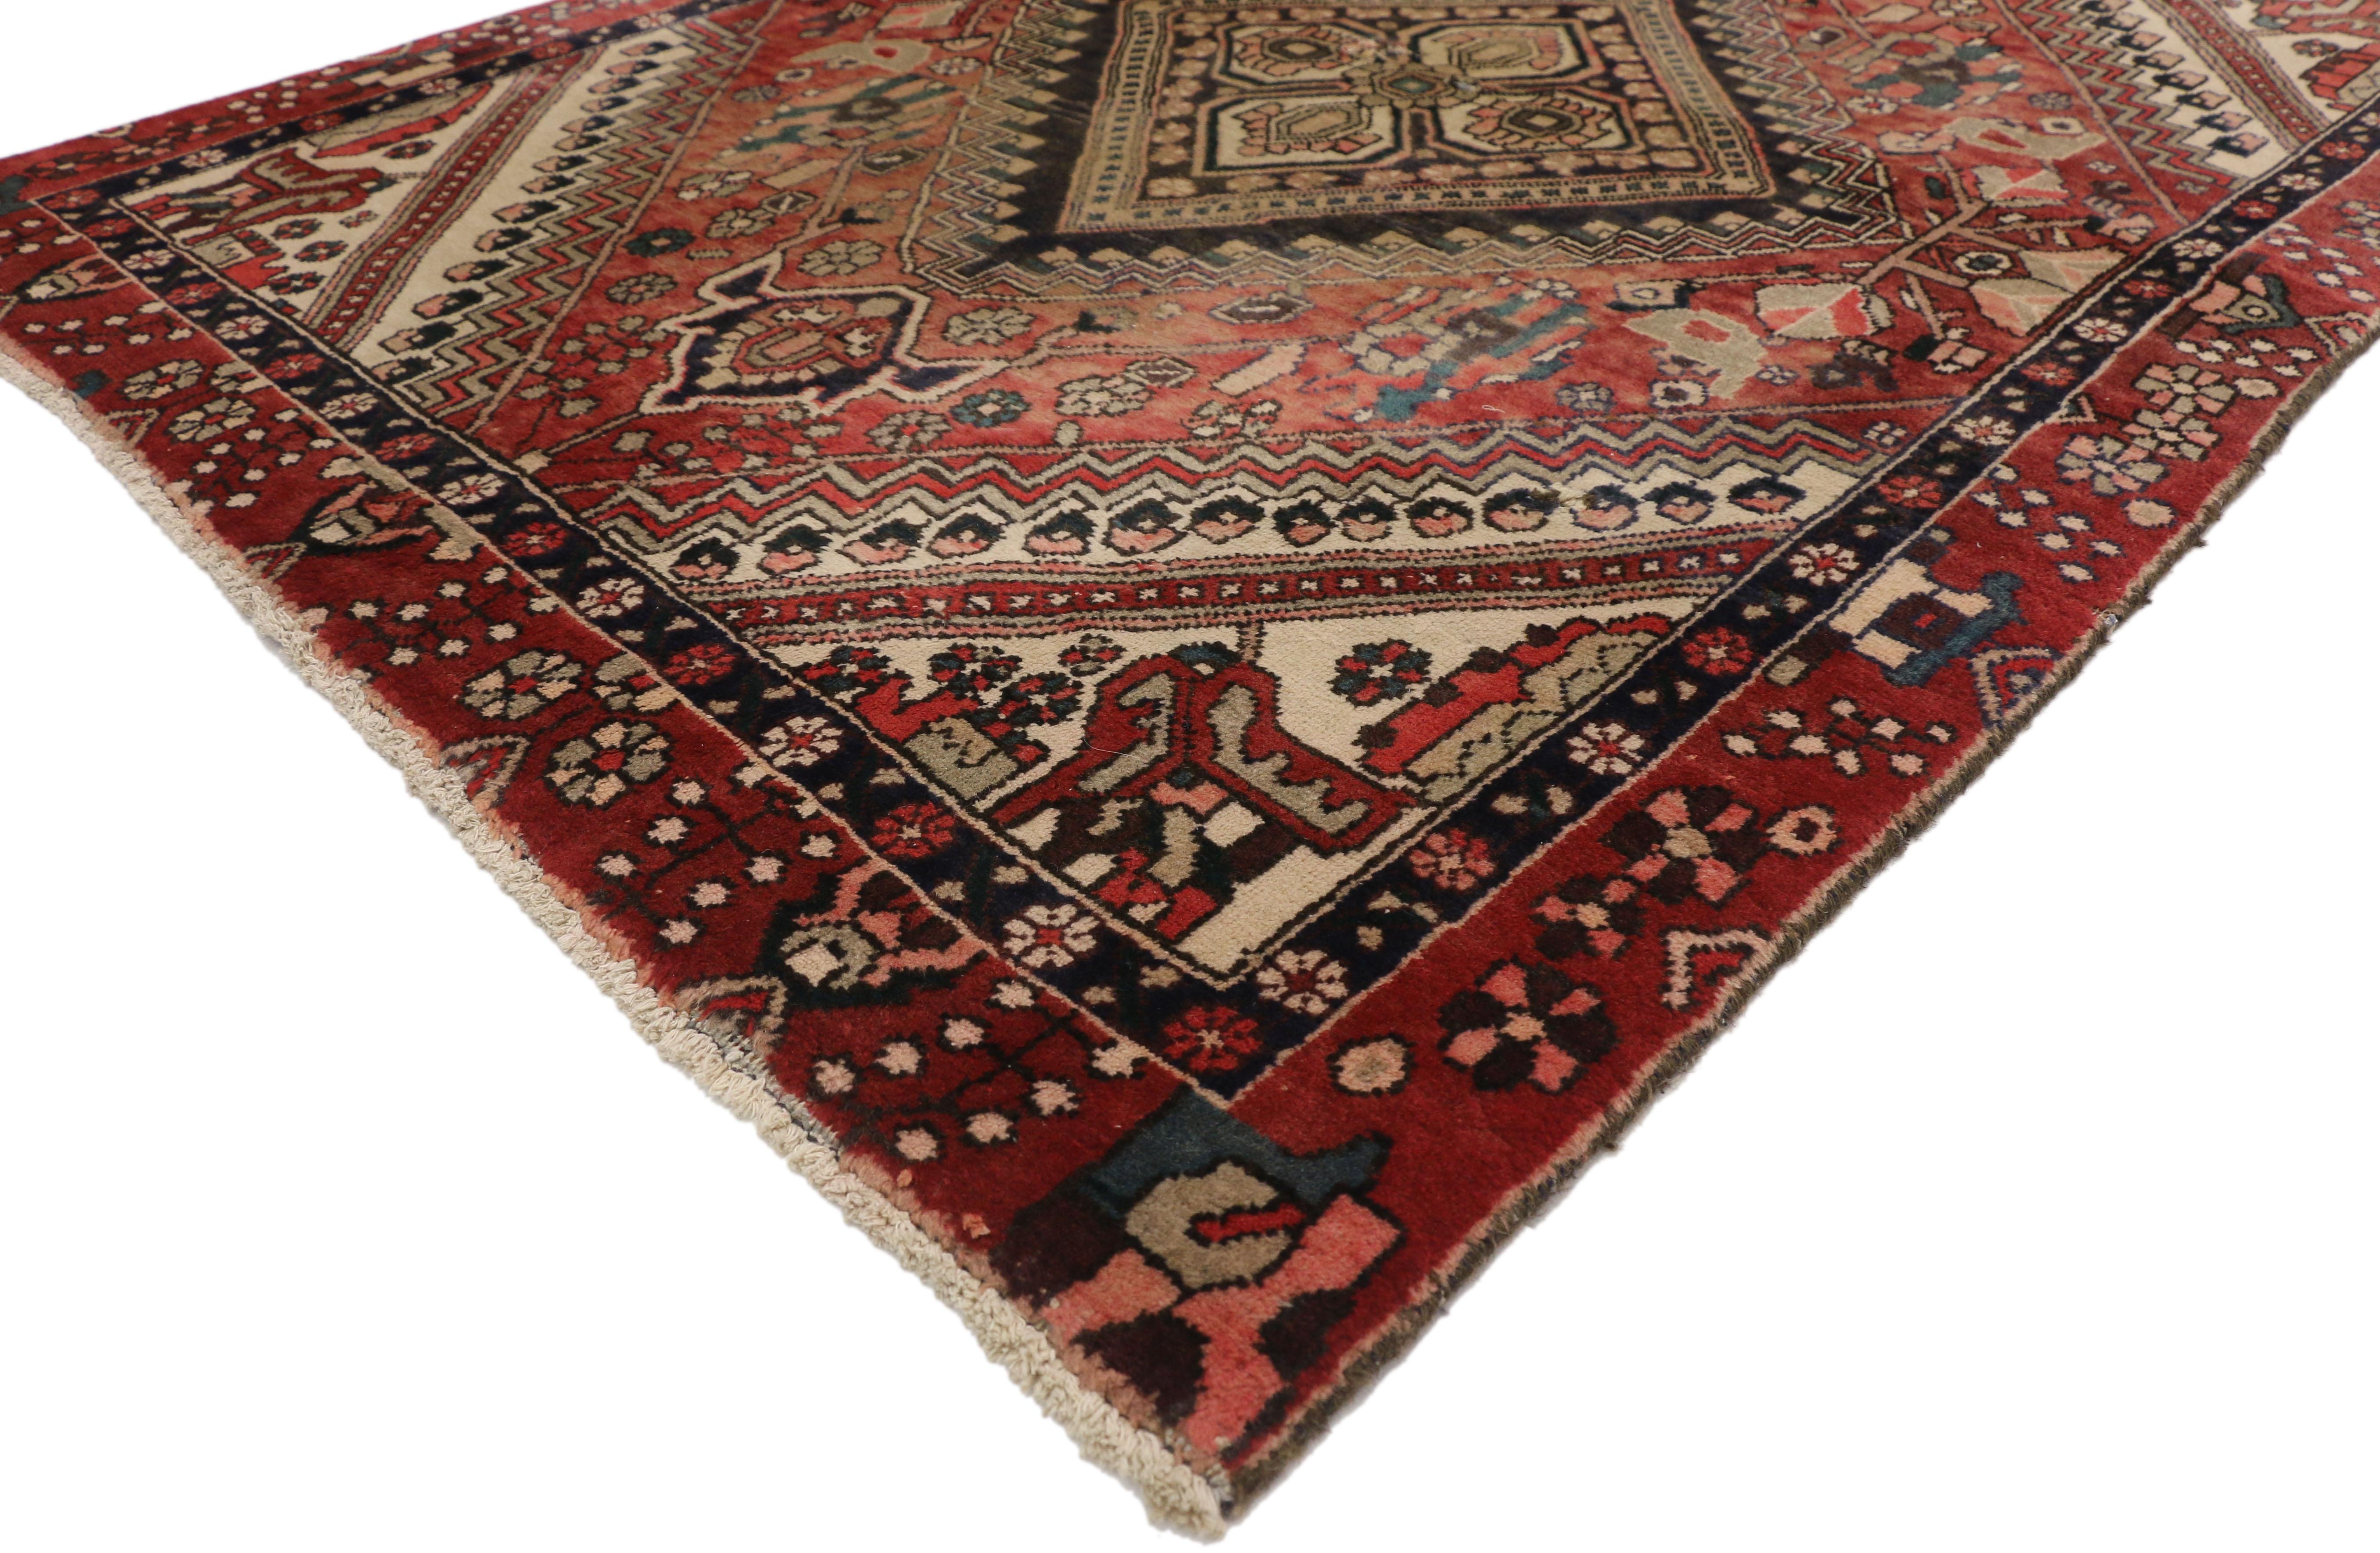 72118 Vintage Persian Shiraz rug with rustic traditional style. This hand knotted wool vintage Persian Shiraz rug features a diamond lozenge center medallion outlined with zigzag lines and flanked with a palmette finial at either end. The central